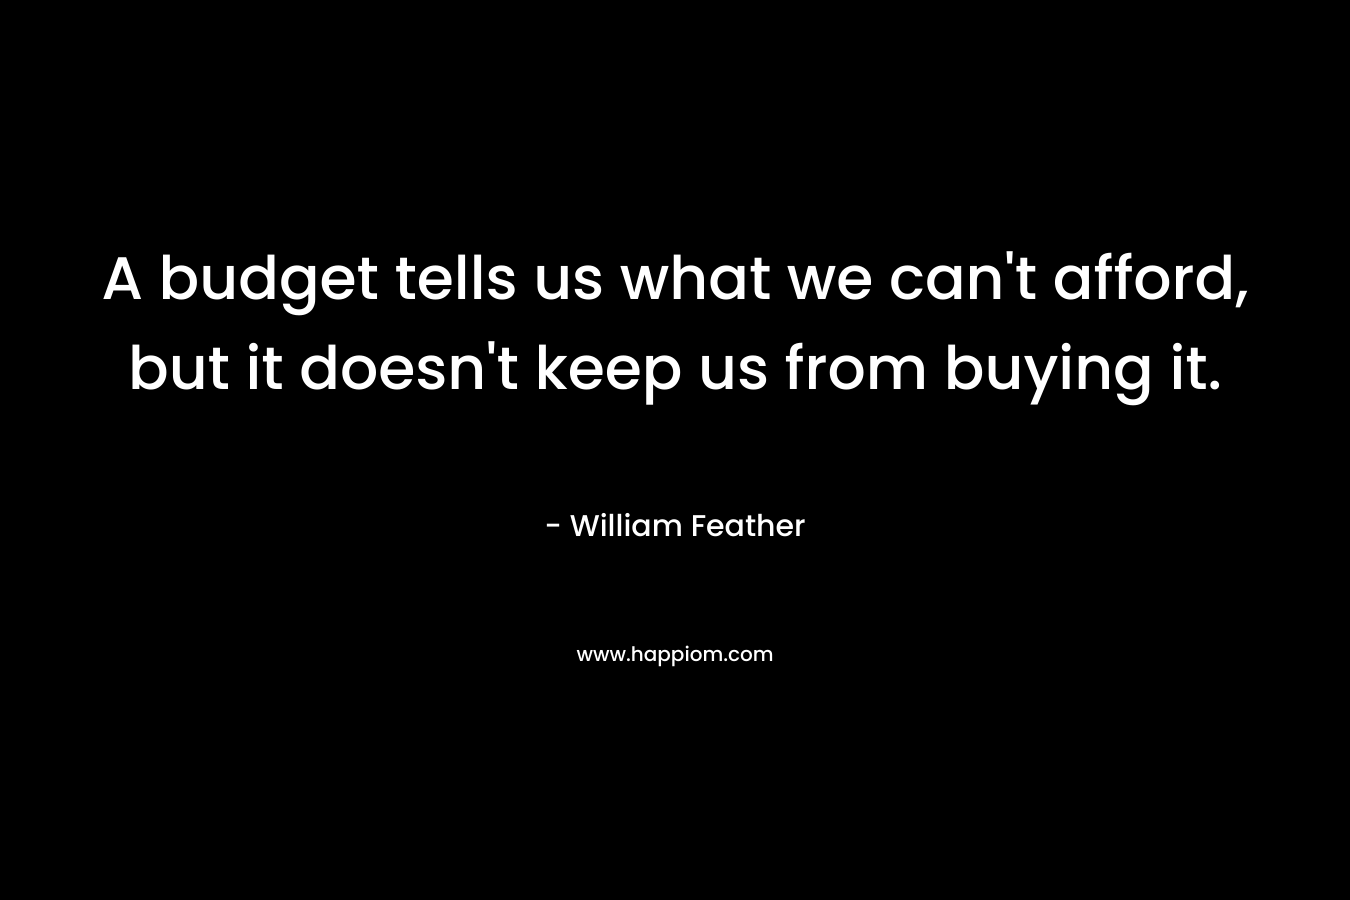 A budget tells us what we can’t afford, but it doesn’t keep us from buying it. – William Feather